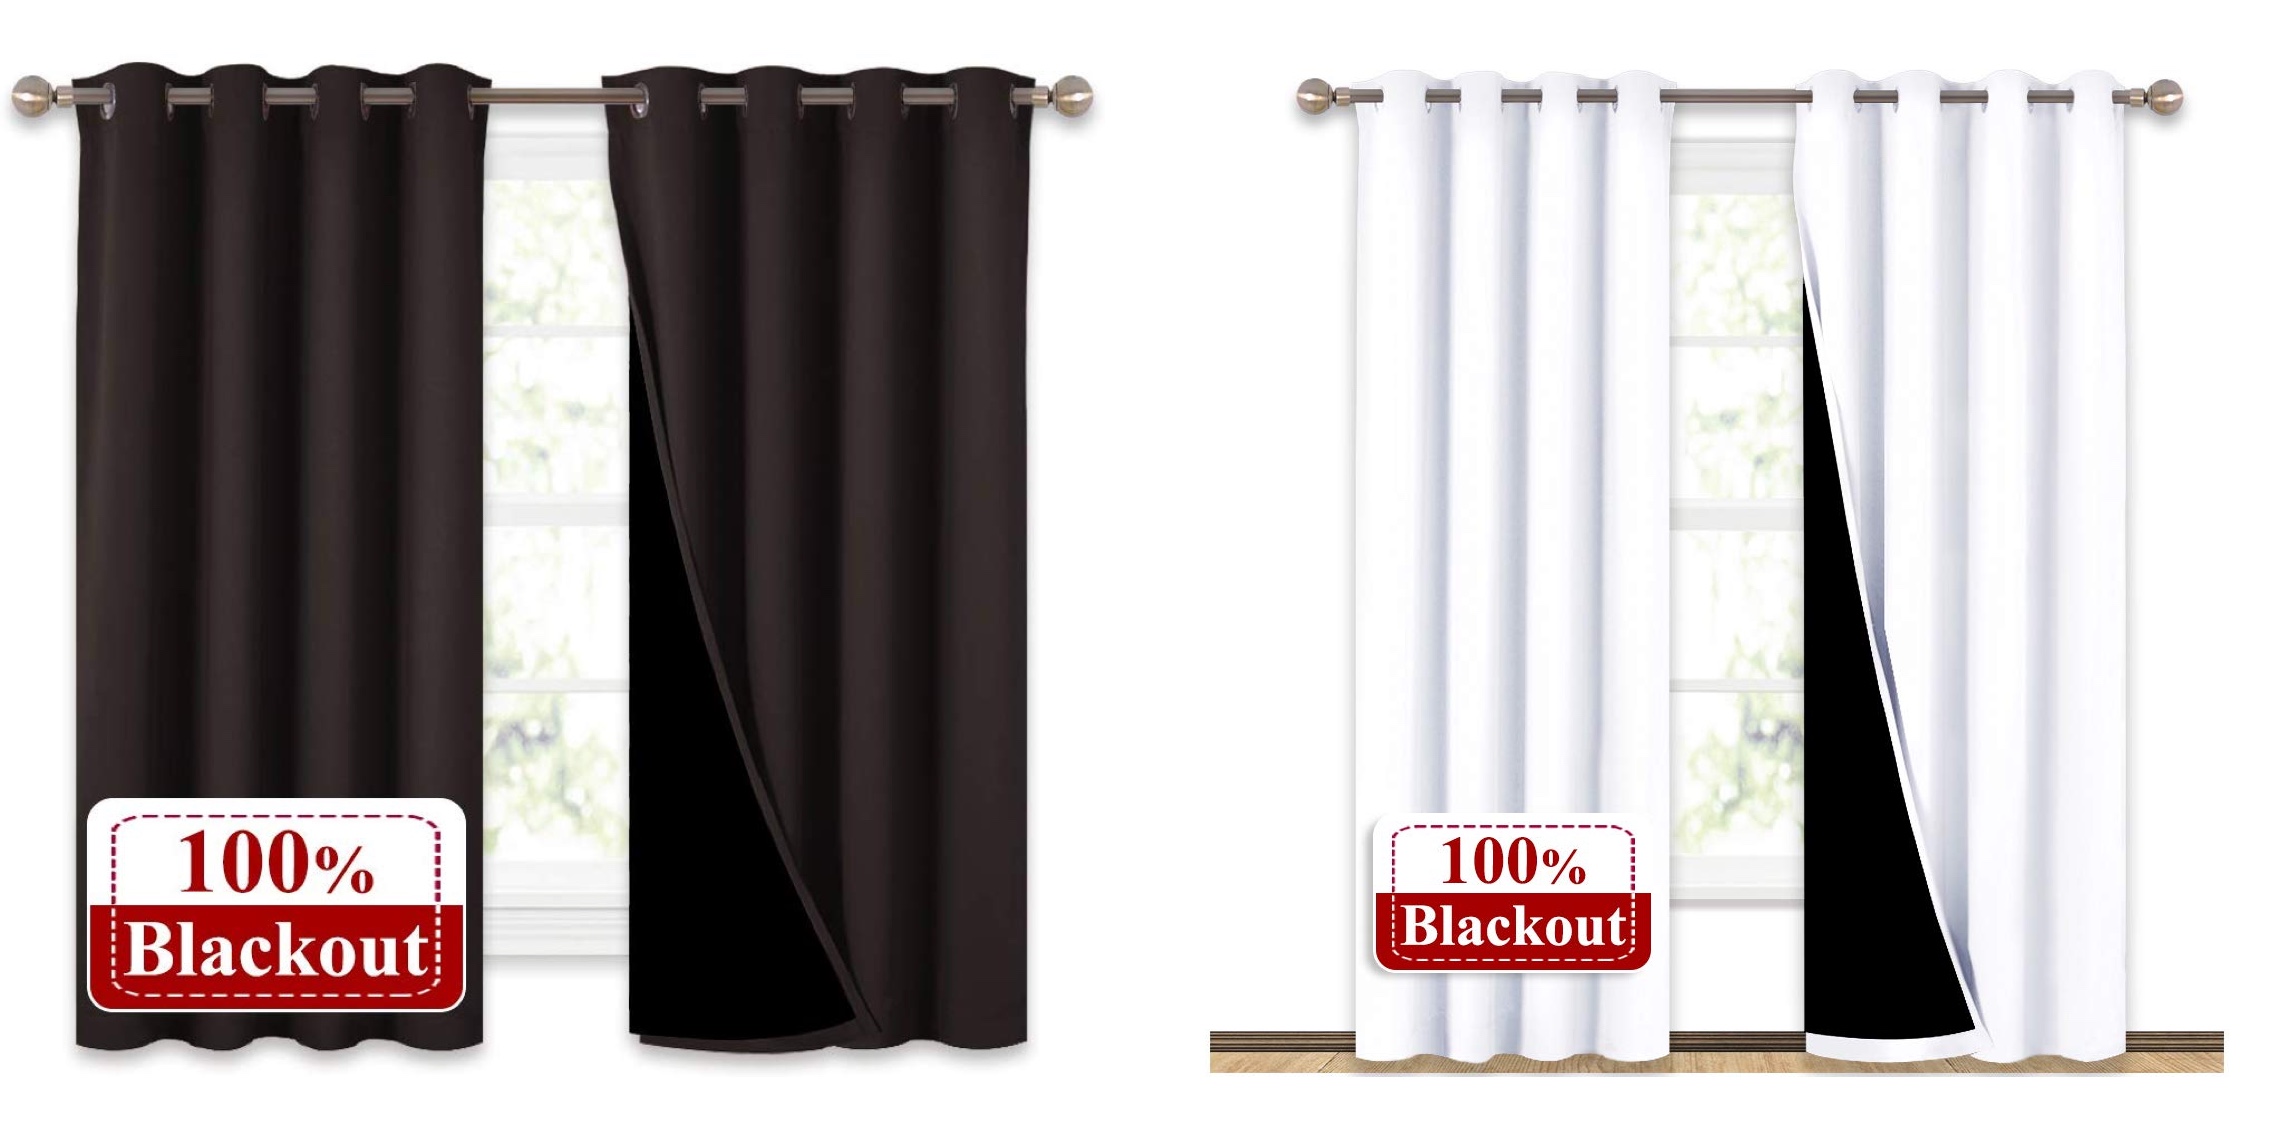 Black out and noise reducing curtains.